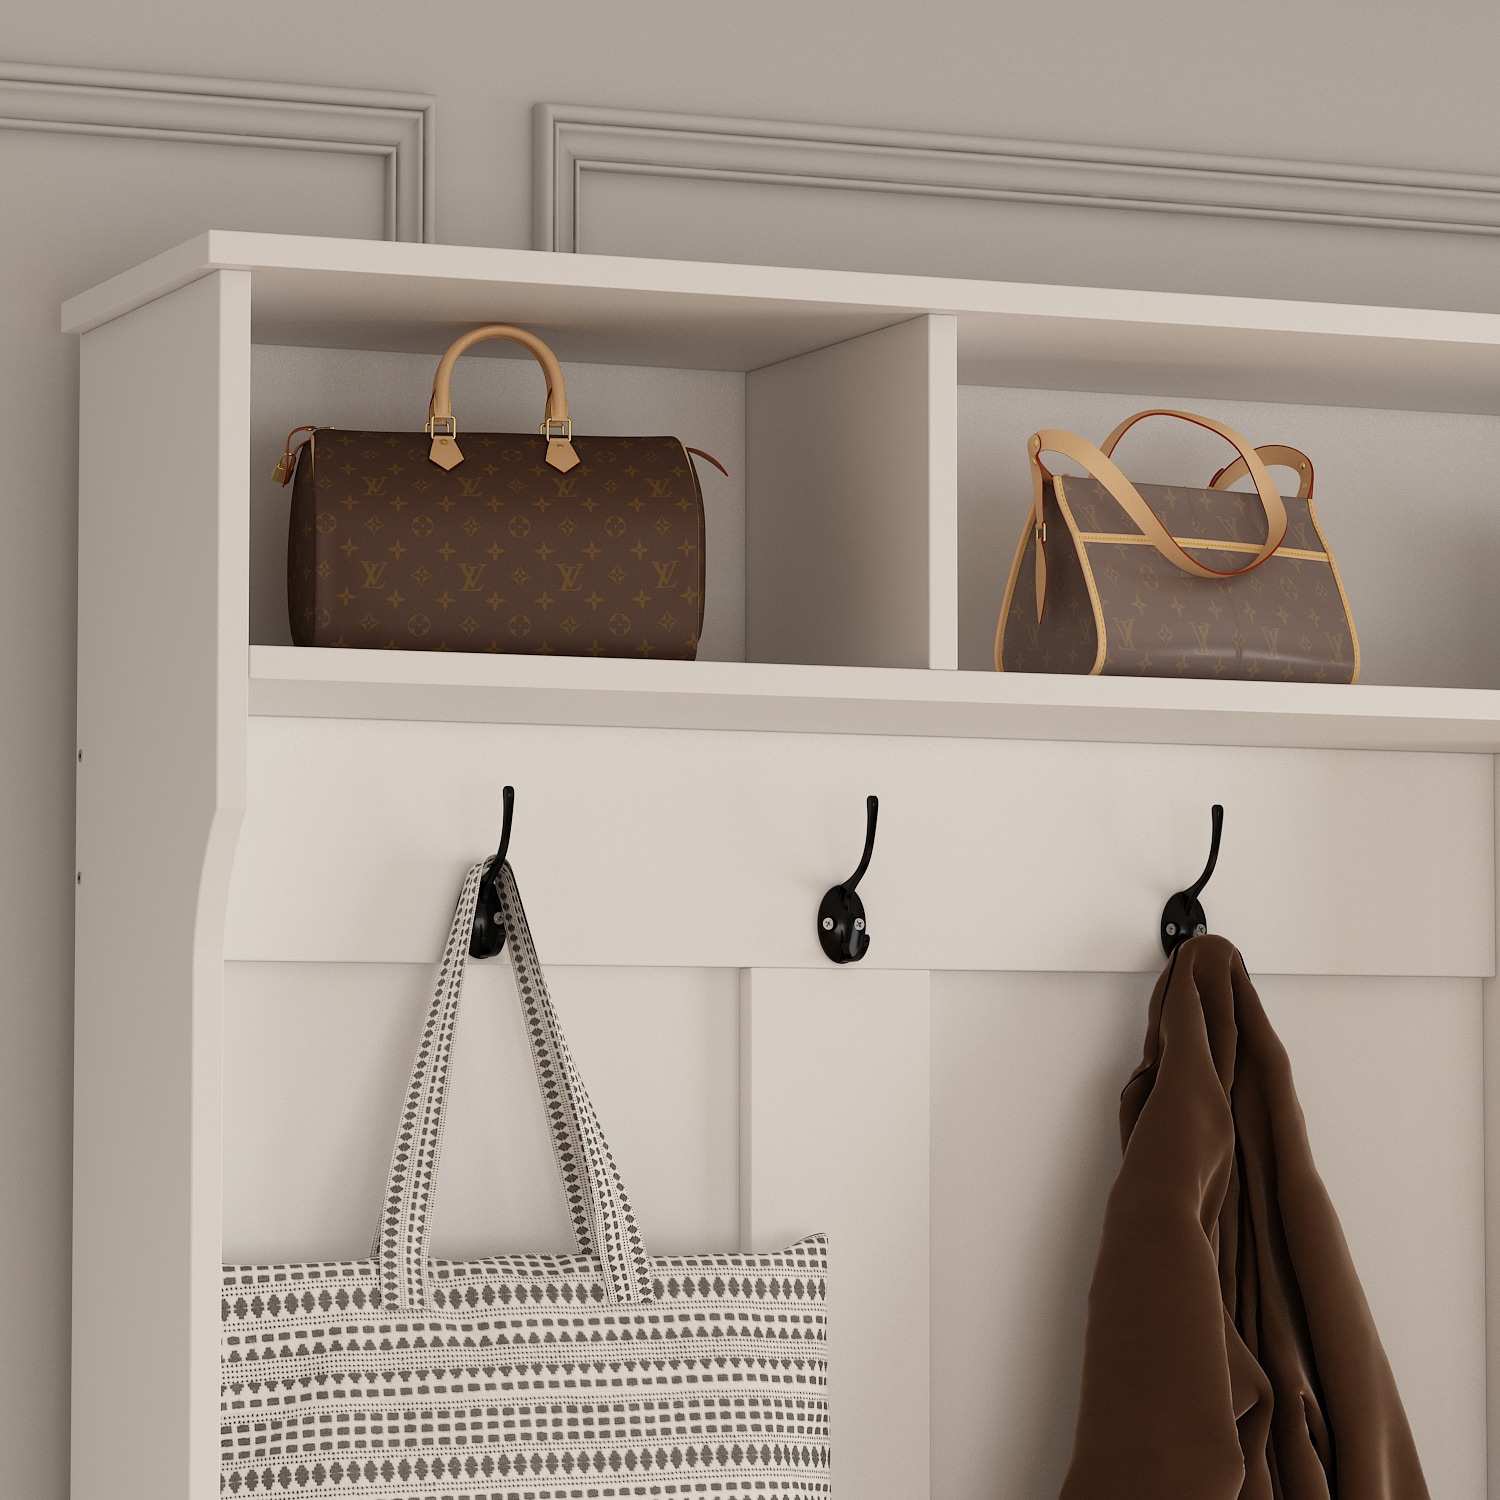 FUFU&GAGA Contemporary Hanging Wardrobe with Storage Compartments, Coat Hooks, and Shoe Cabinets in White | LJY-KFJH0268-01+02